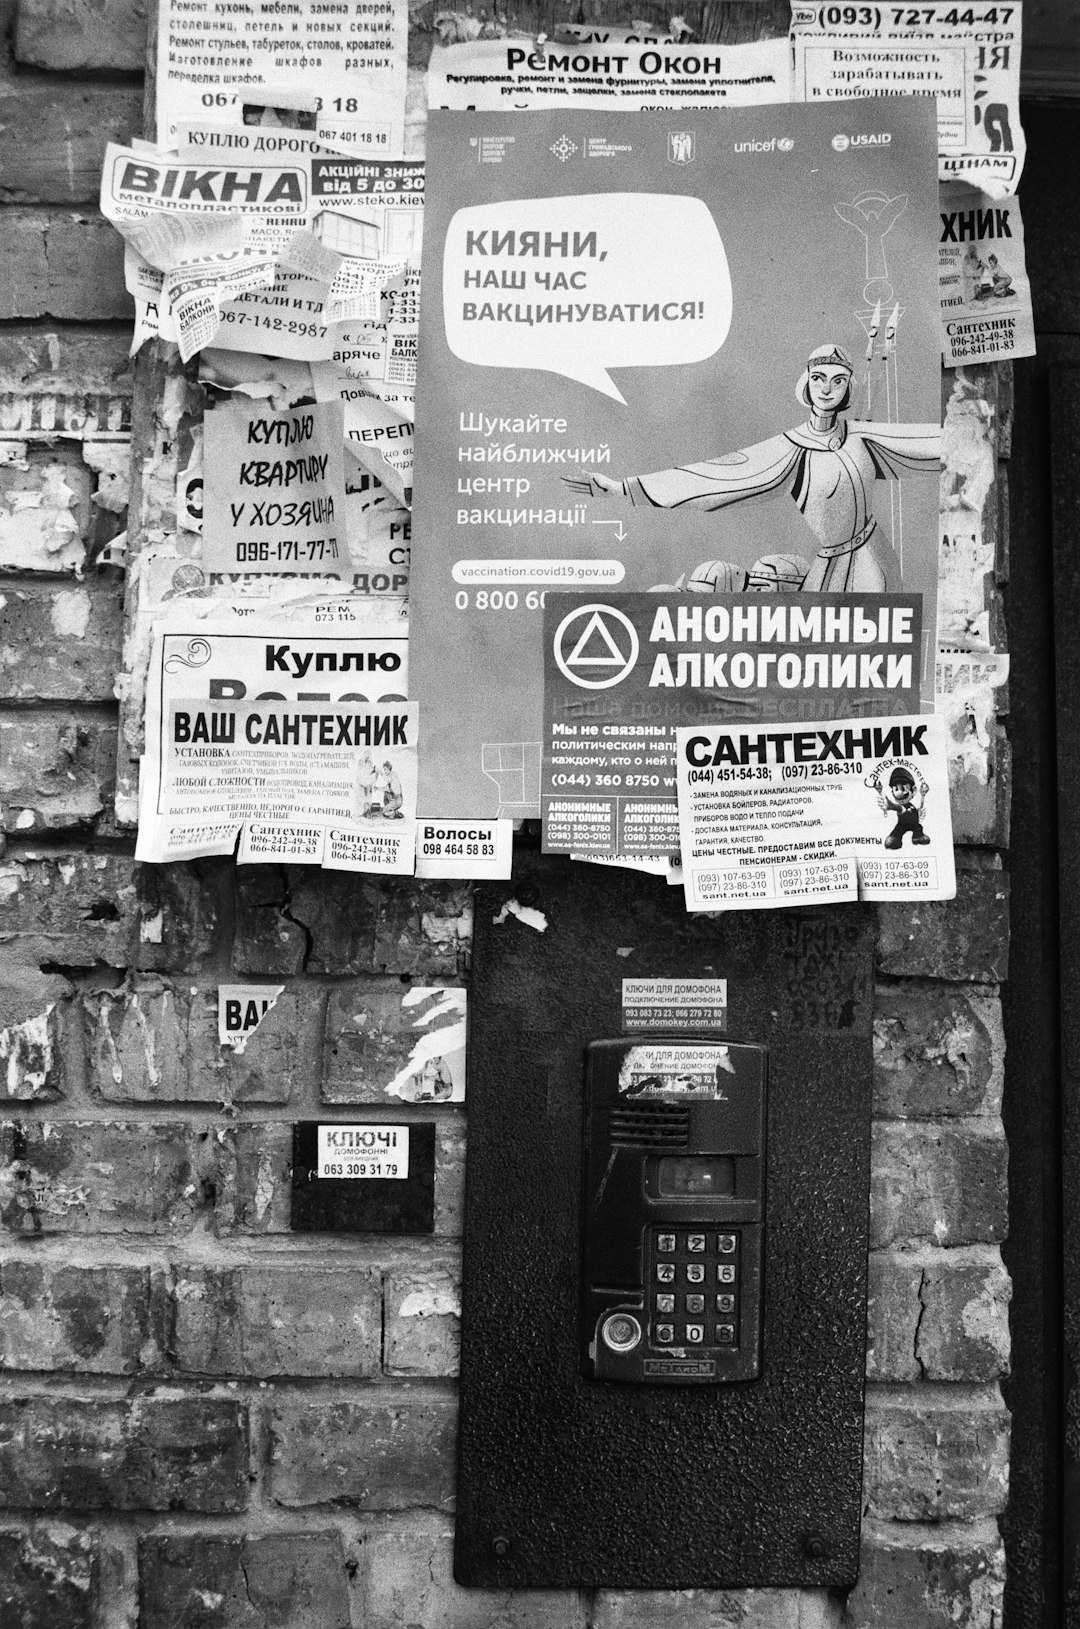 grayscale photo of telephone booth